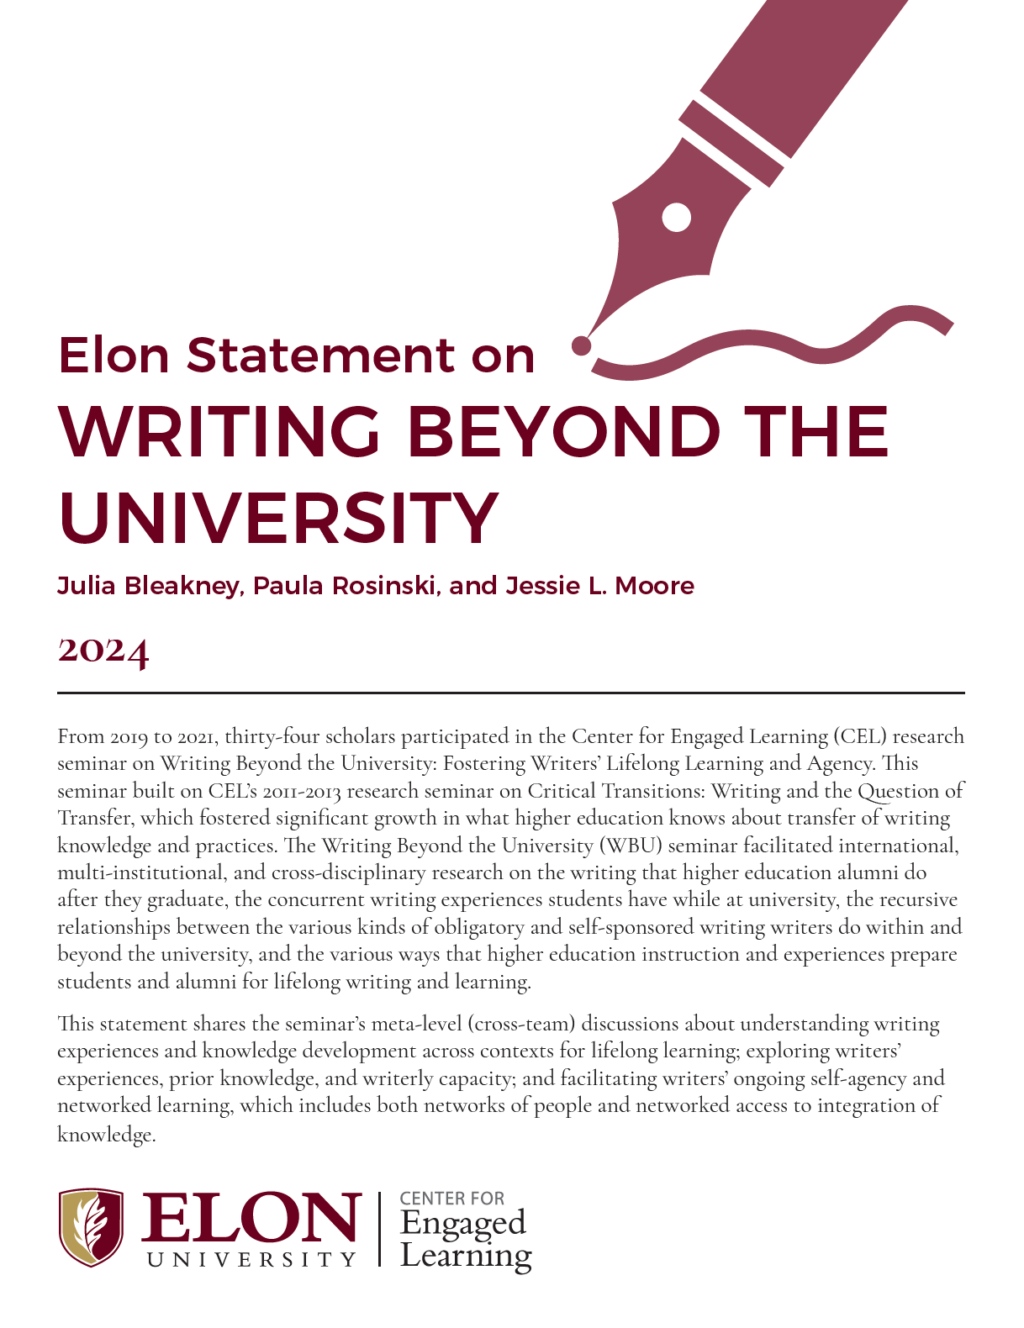 The cover page of the PDF version of the Elon Statement on Writing Beyond the University